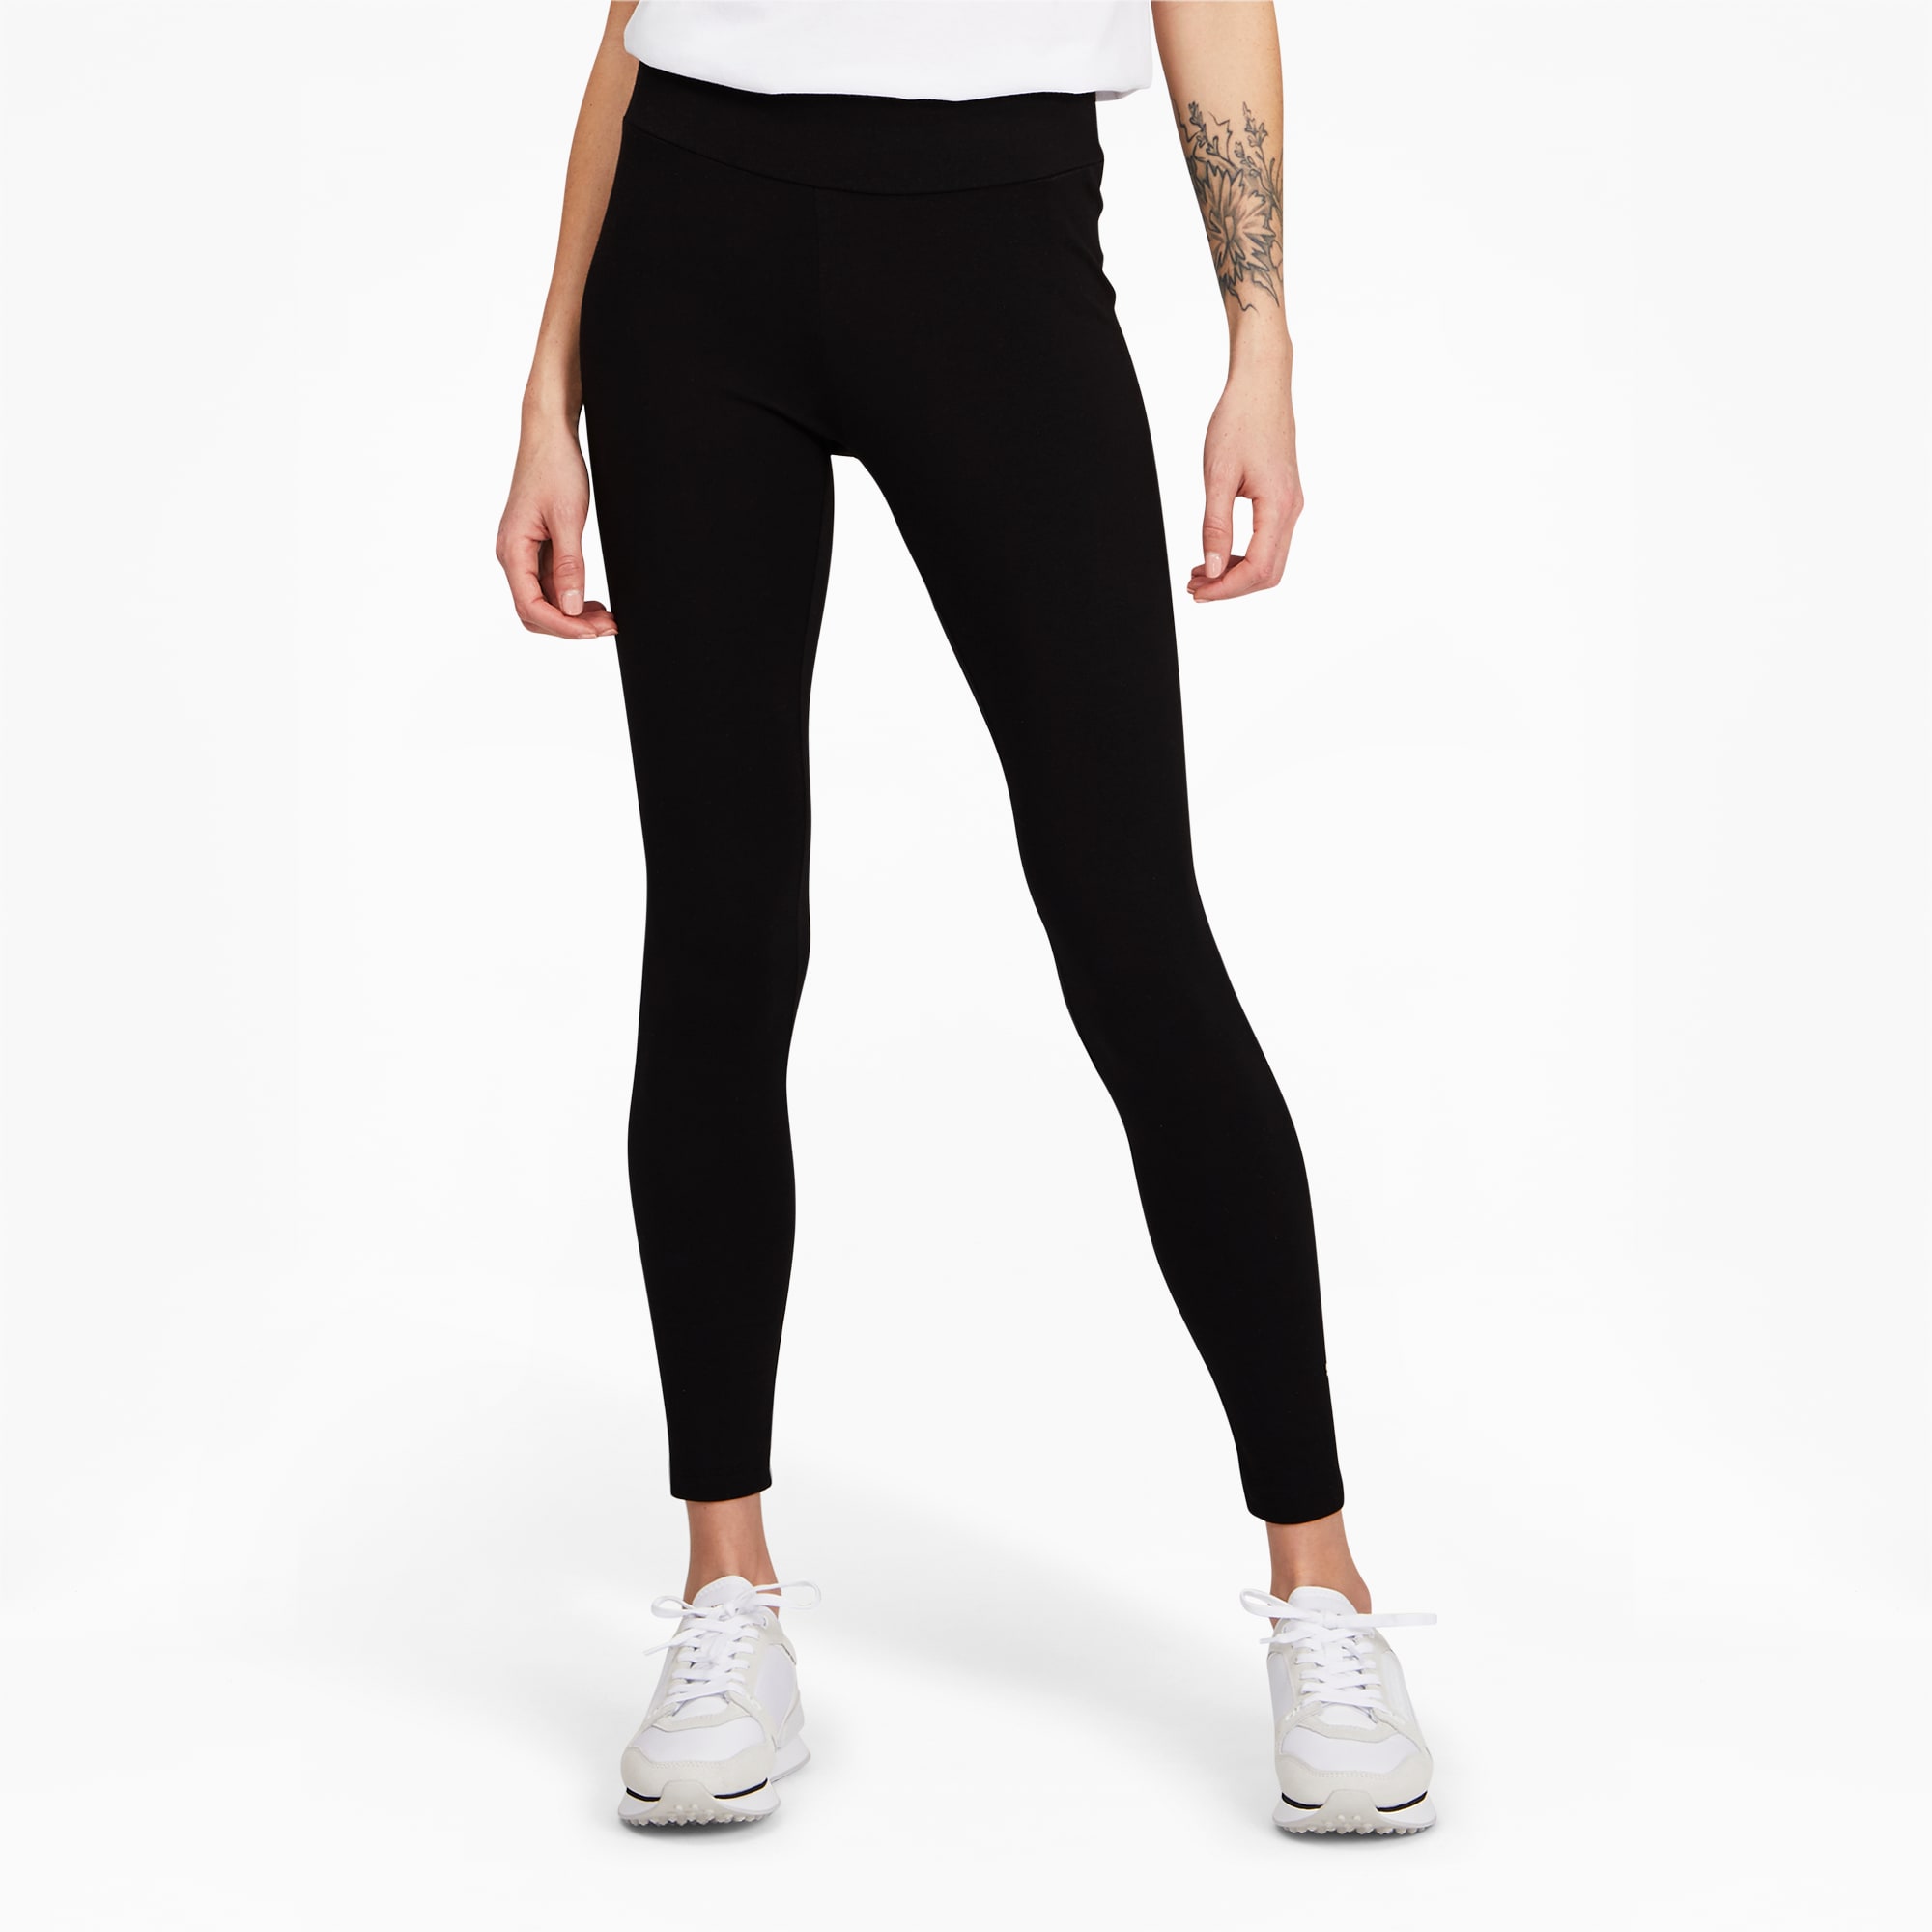 PUMA: Joggers for men and women are now $19.99